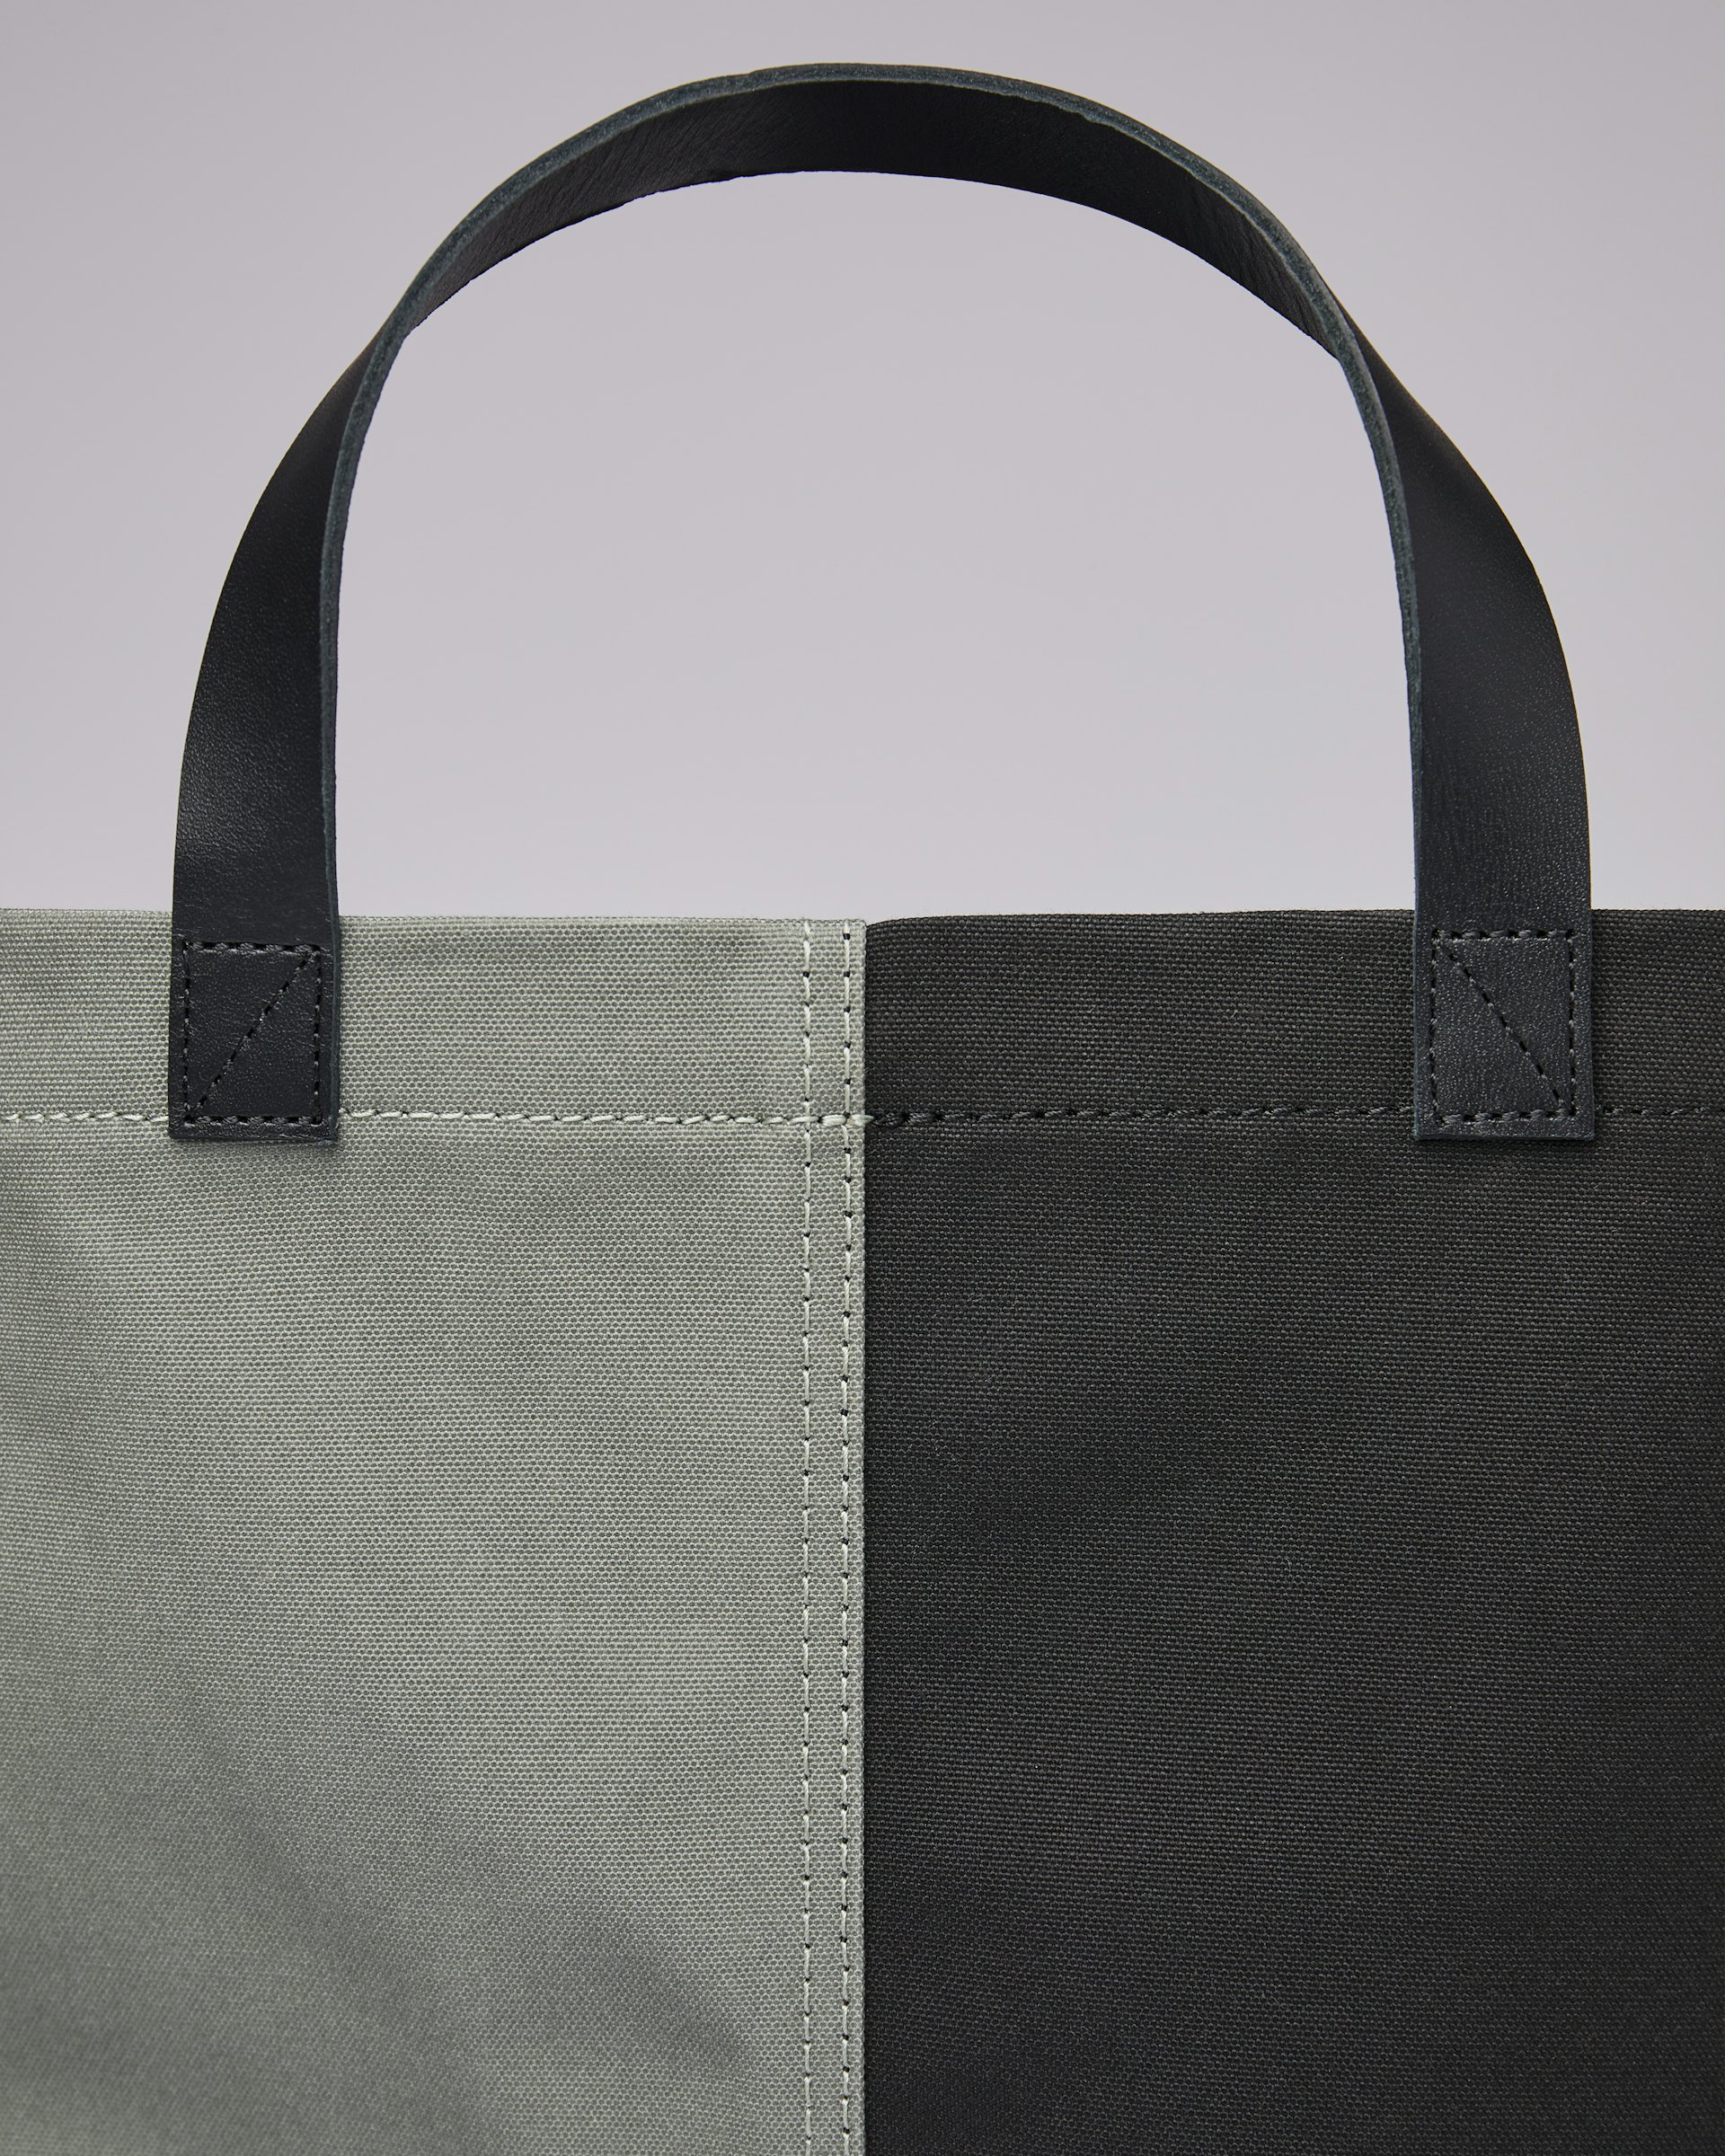 Frankie belongs to the category Tote bags and is in color black & dusty green (2 of 7)